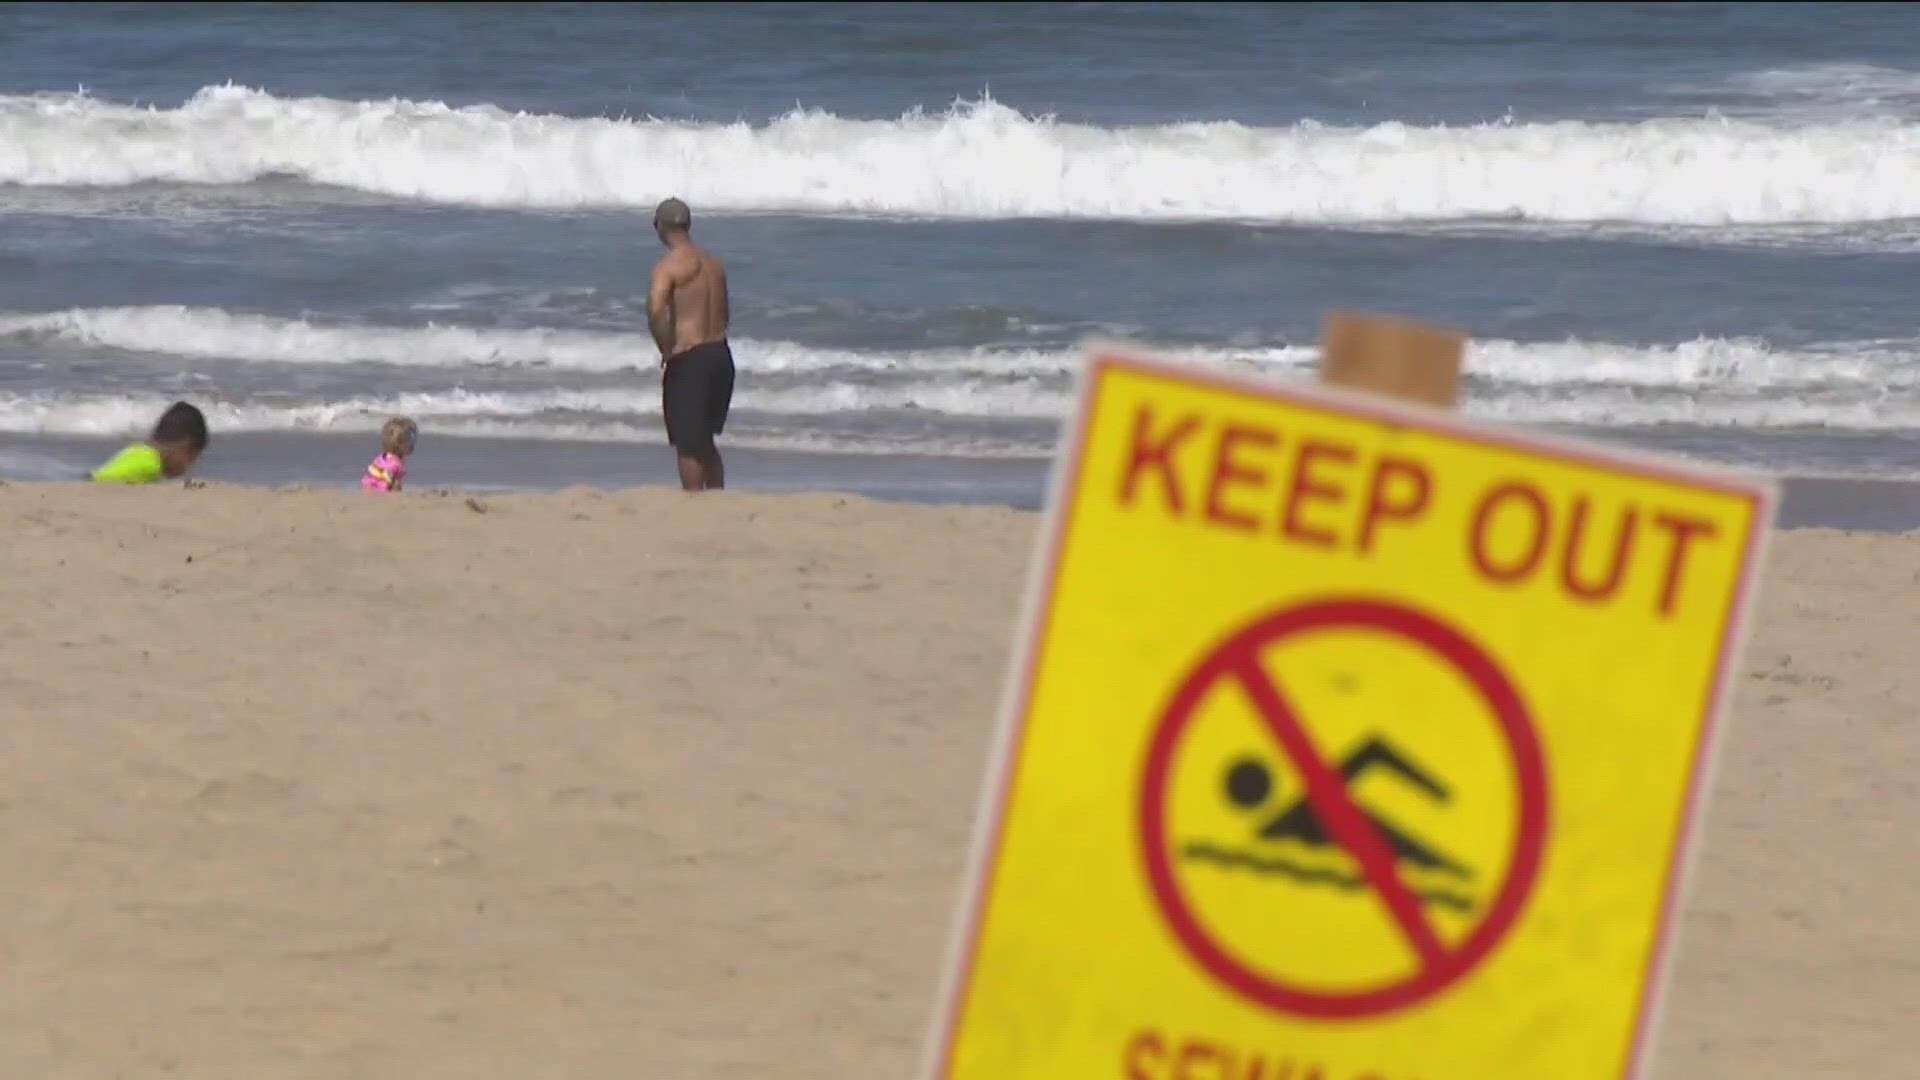 Medical practitioners are seeing sick patients in South Bay who never went into the ocean.